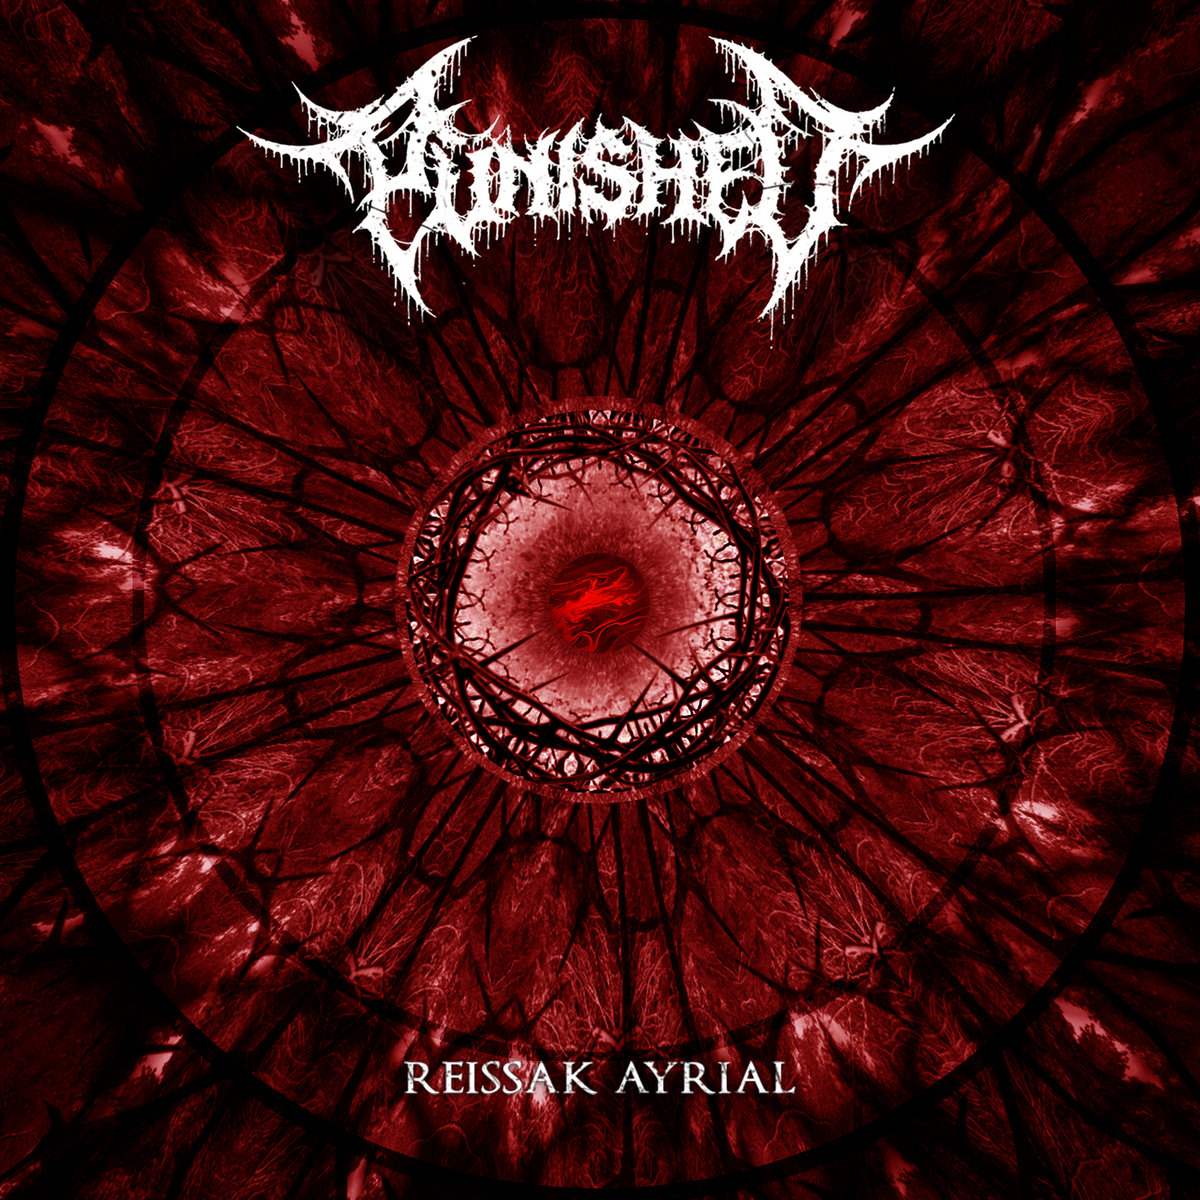 Bandcamp album cover of Reissak Ayrial by Punished